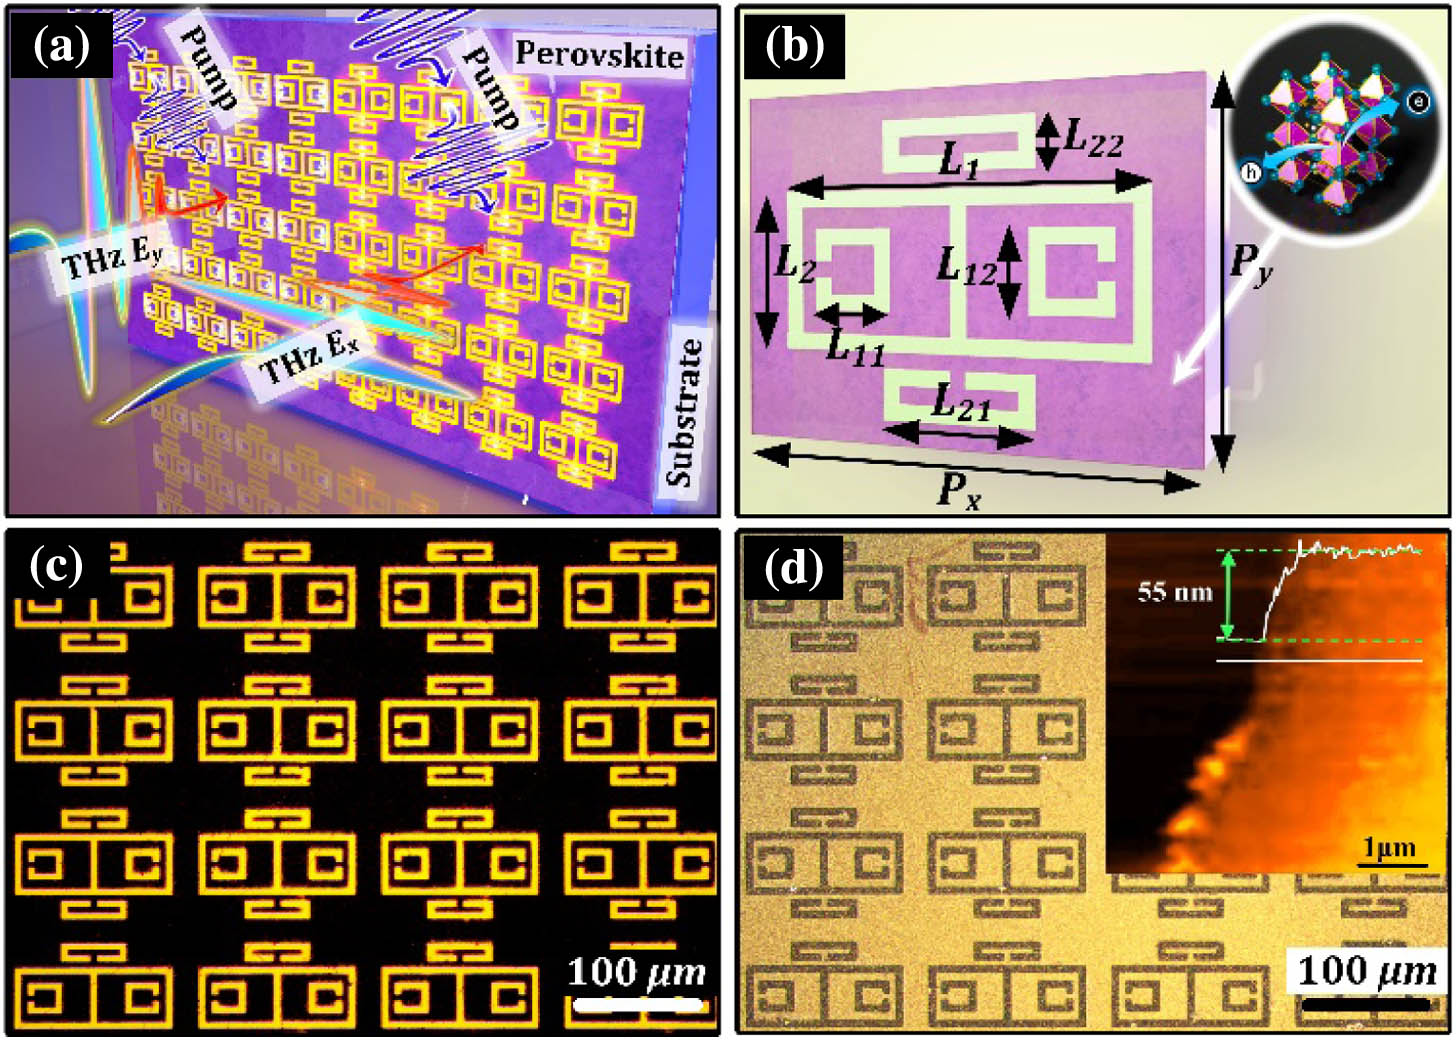 (a) Schematic of the polarization-dependent metamaterial-perovskite THz device. A periodic array of CRRs and SRRs tailors the PIT resonance at different frequencies determined by incident polarizations. A thin perovskite film is deposited on the quartz substrate acting as a photoactive layer illuminated by optical pump pulses (400 nm). (b) Schematic view of the functional unit cell. The thickness of the quartz substrate is H=2 mm, the height of the Au metamaterial is h=127 nm, and the period is Px=150 μm, Py=110 μm. Geometric parameters of the structure are L1=120 μm, L2=50 μm, L11=26 μm, L12=25 μm, L21=50 μm, L22=18 μm, respectively. Inset presentation shows the crystal structure of T−CH3NH3PbI3 phases. Optical microscopic images of fabricated Au structures (c) before and (d) after covering a 55 nm perovskite thin film, where the scale bar represents 100 μm, and the inset picture shows the thickness of the perovskite film.